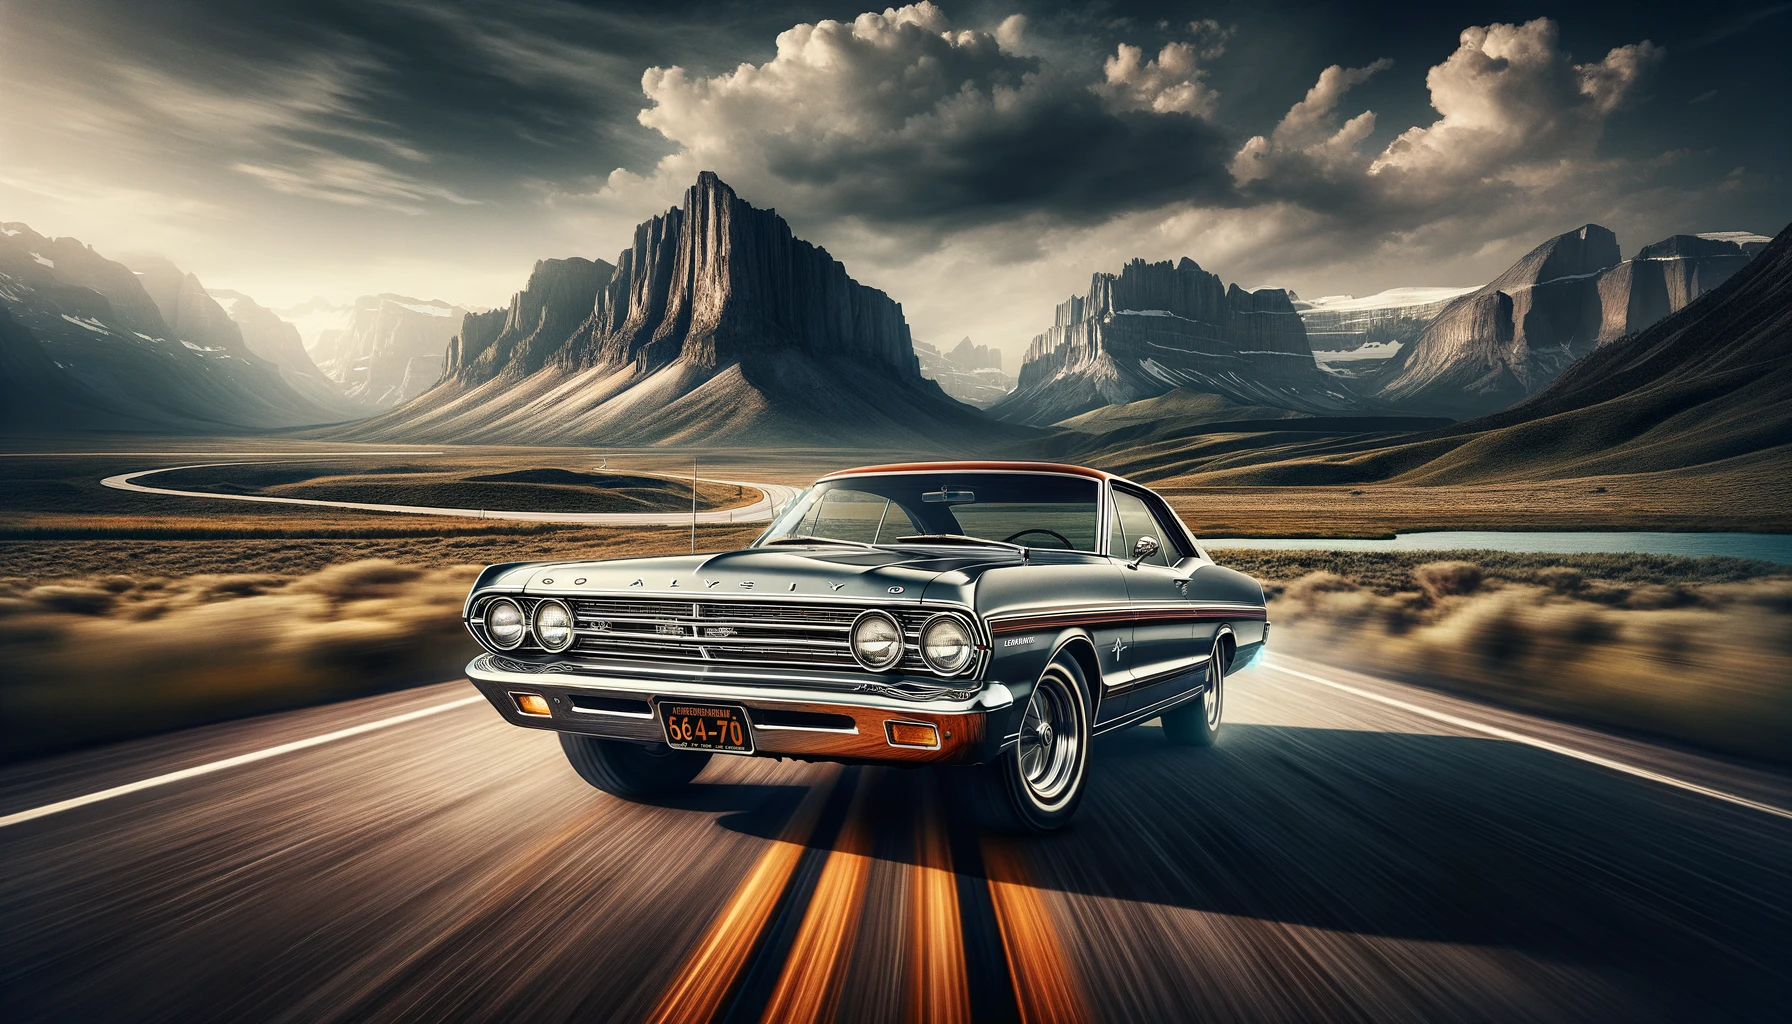 A dynamic shot of the 1968 Ford Galaxie 500 Fastback cruising on an open road